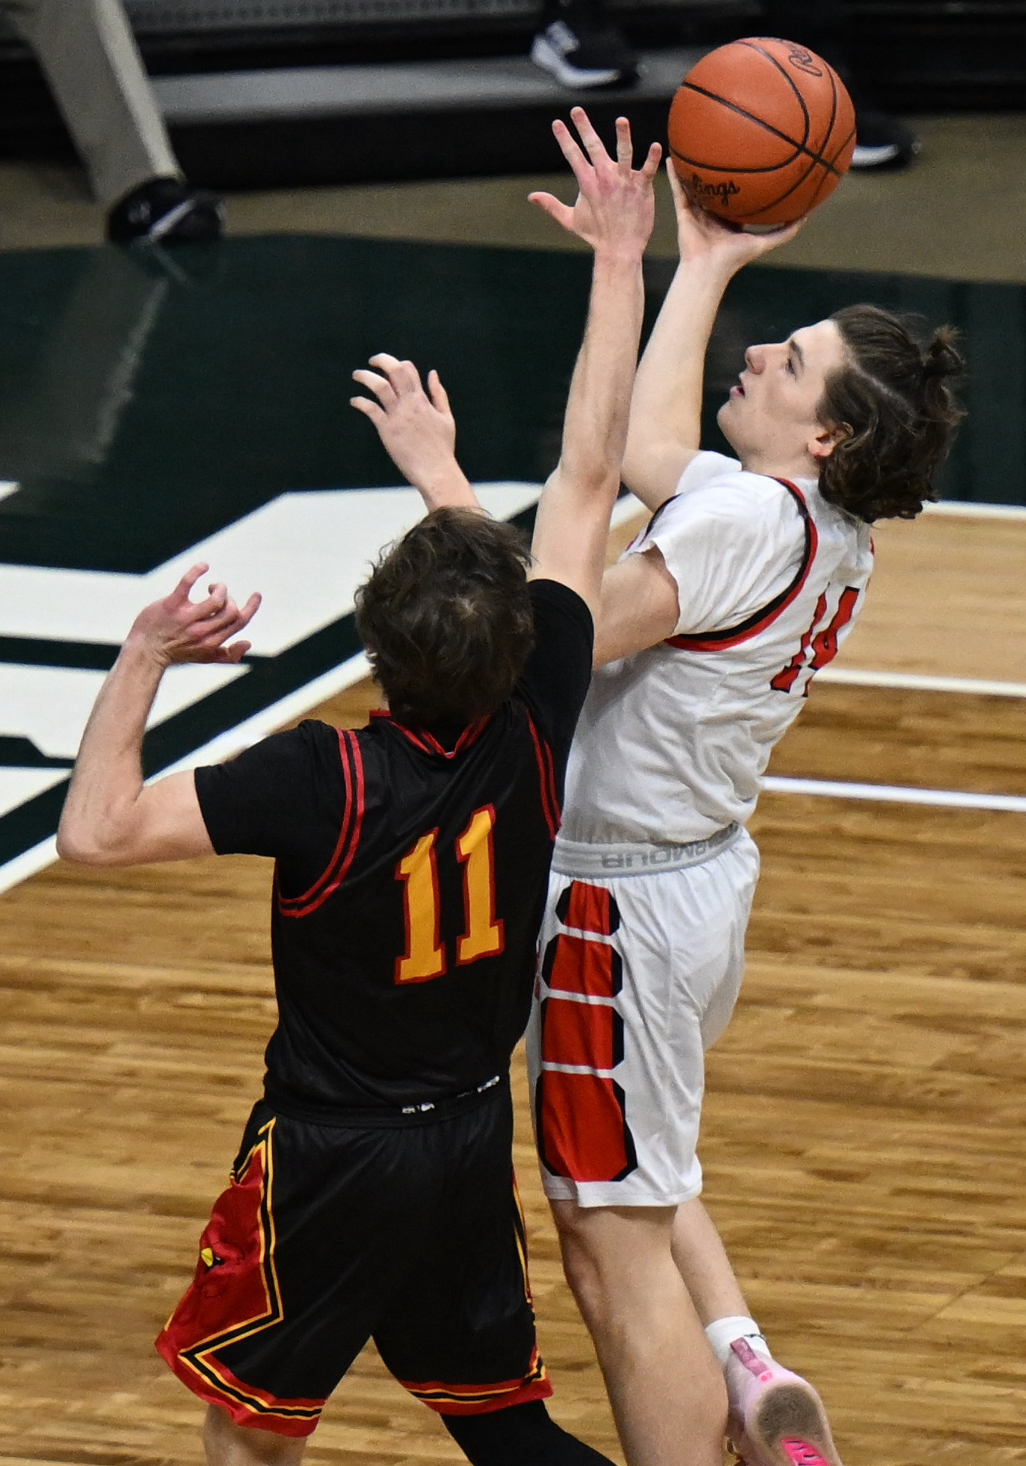 The Mustangs’ Cully Trzeciak (14) works to get up a shot over Ryan Trombley.